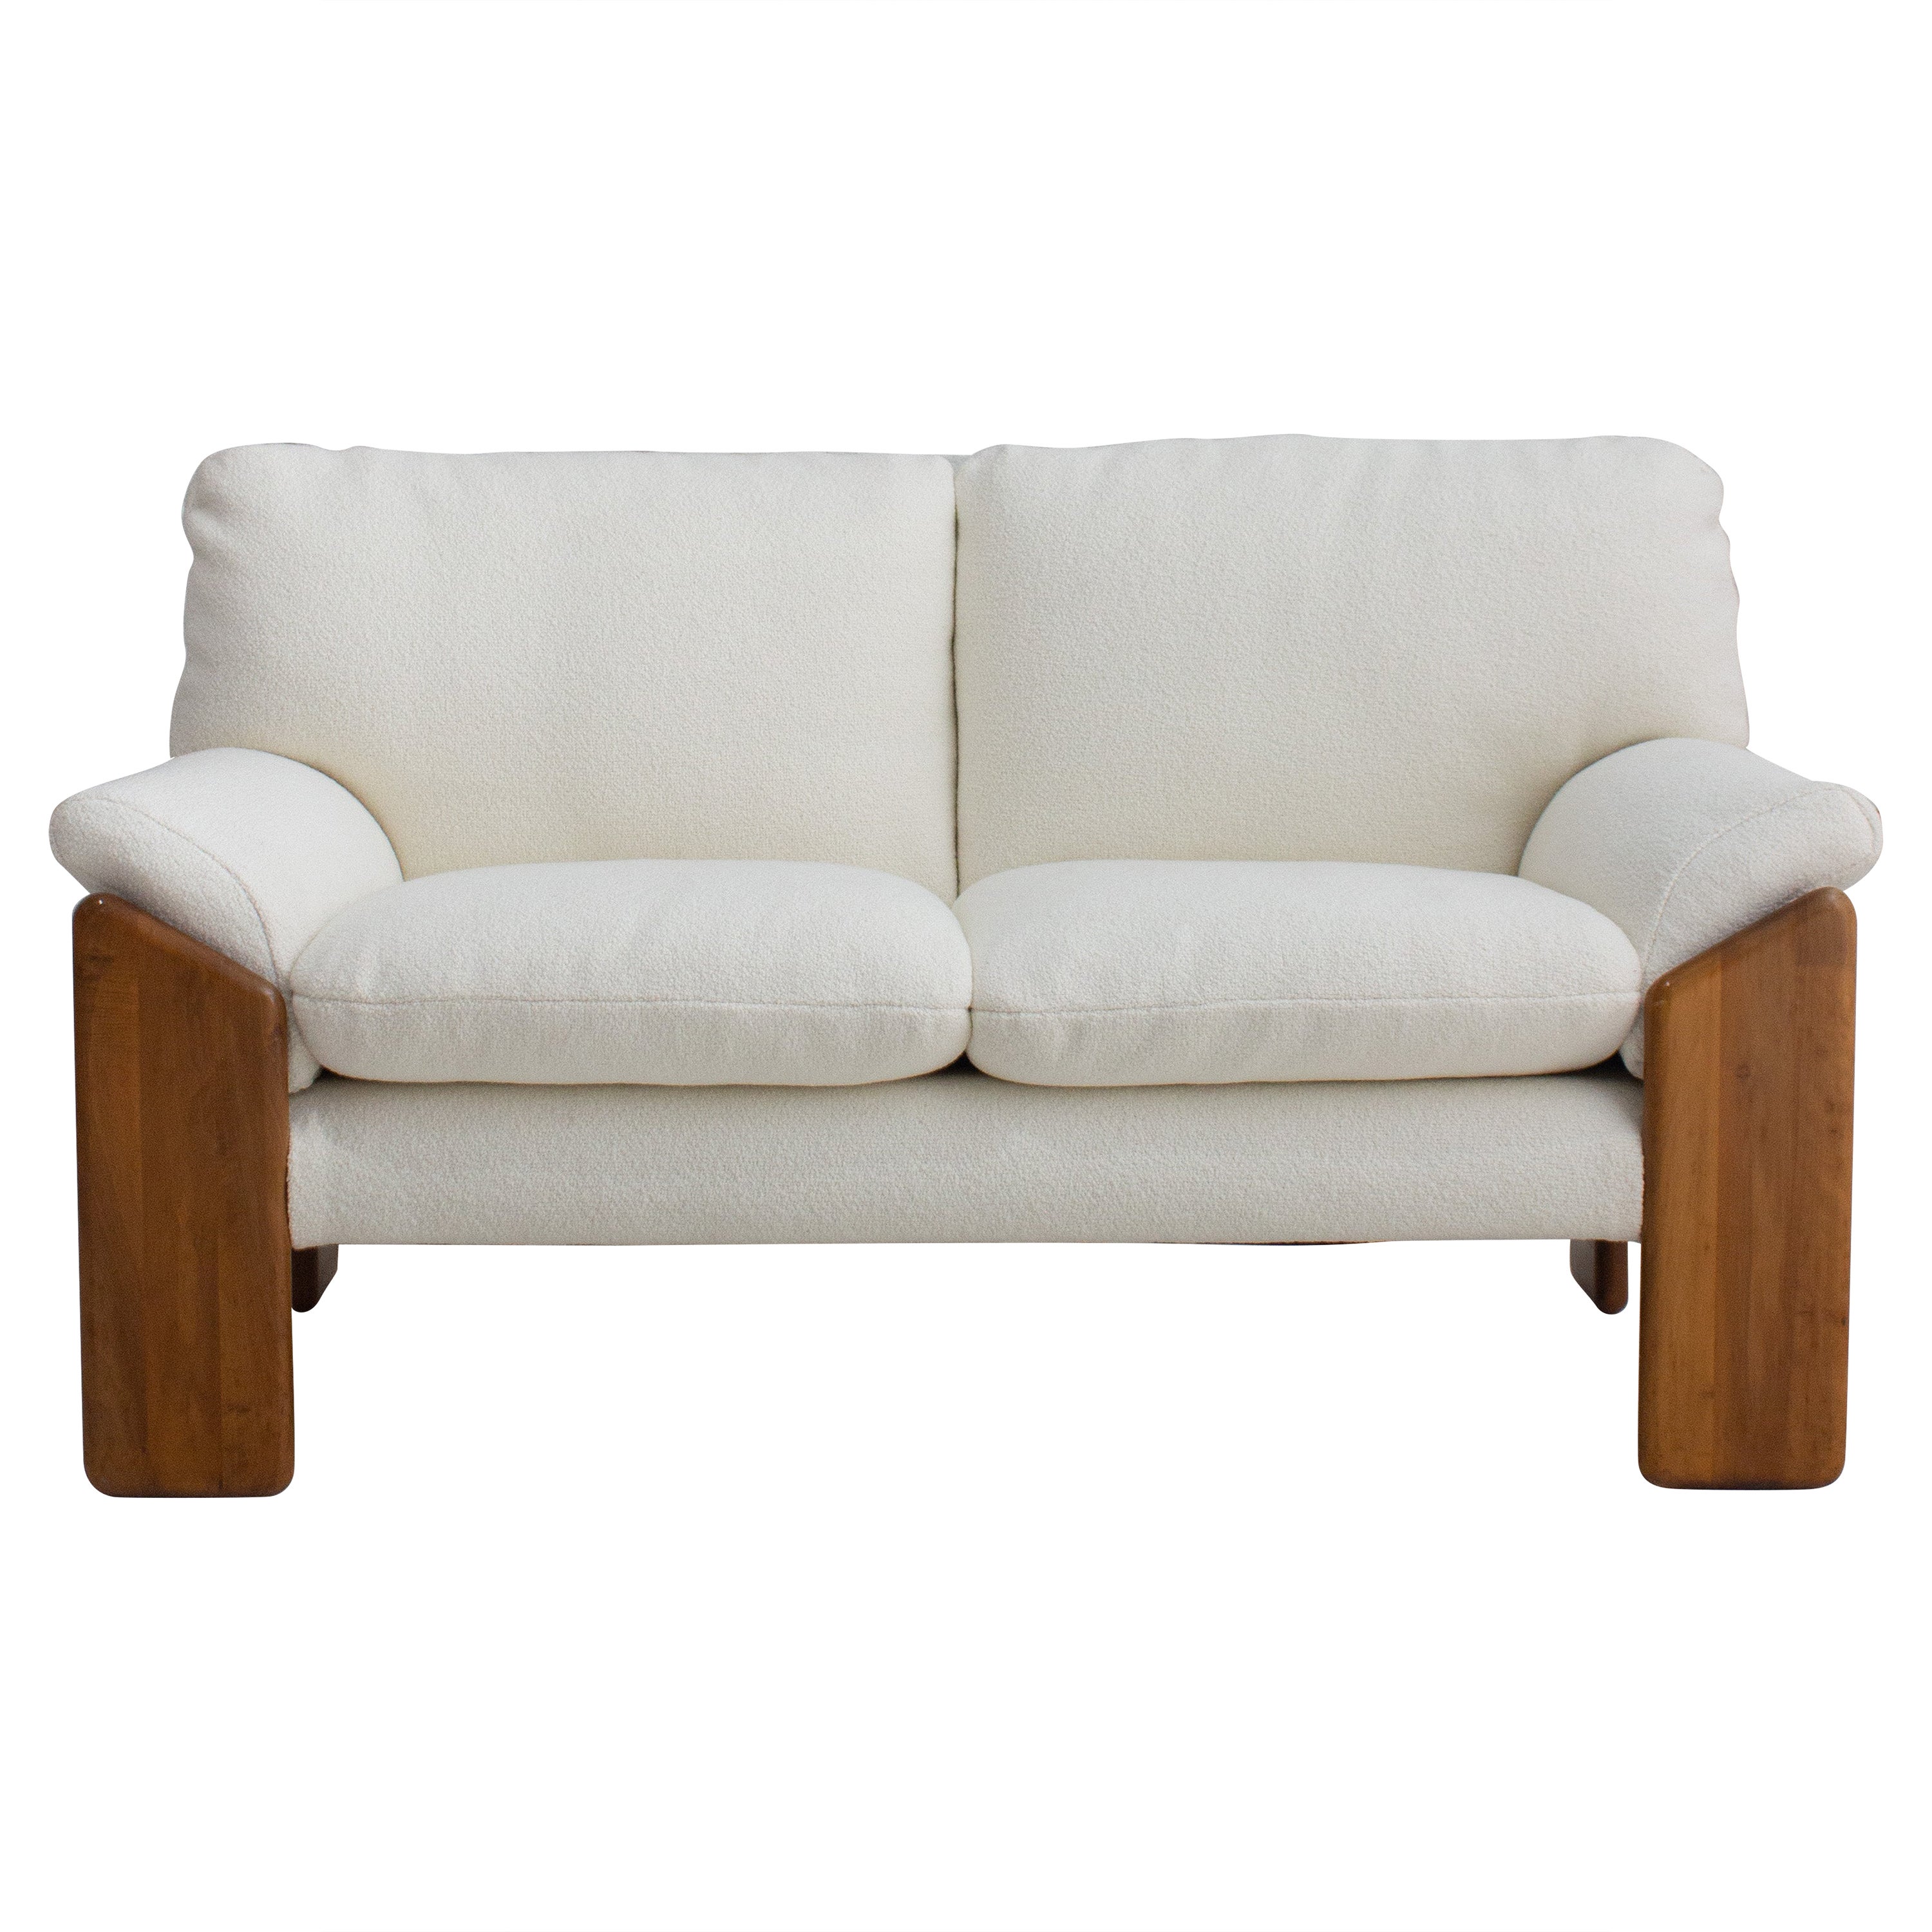 'Sapporo' Wood Frame Two Seat Sofa by Mario Marenco for Mobil Girgi For Sale